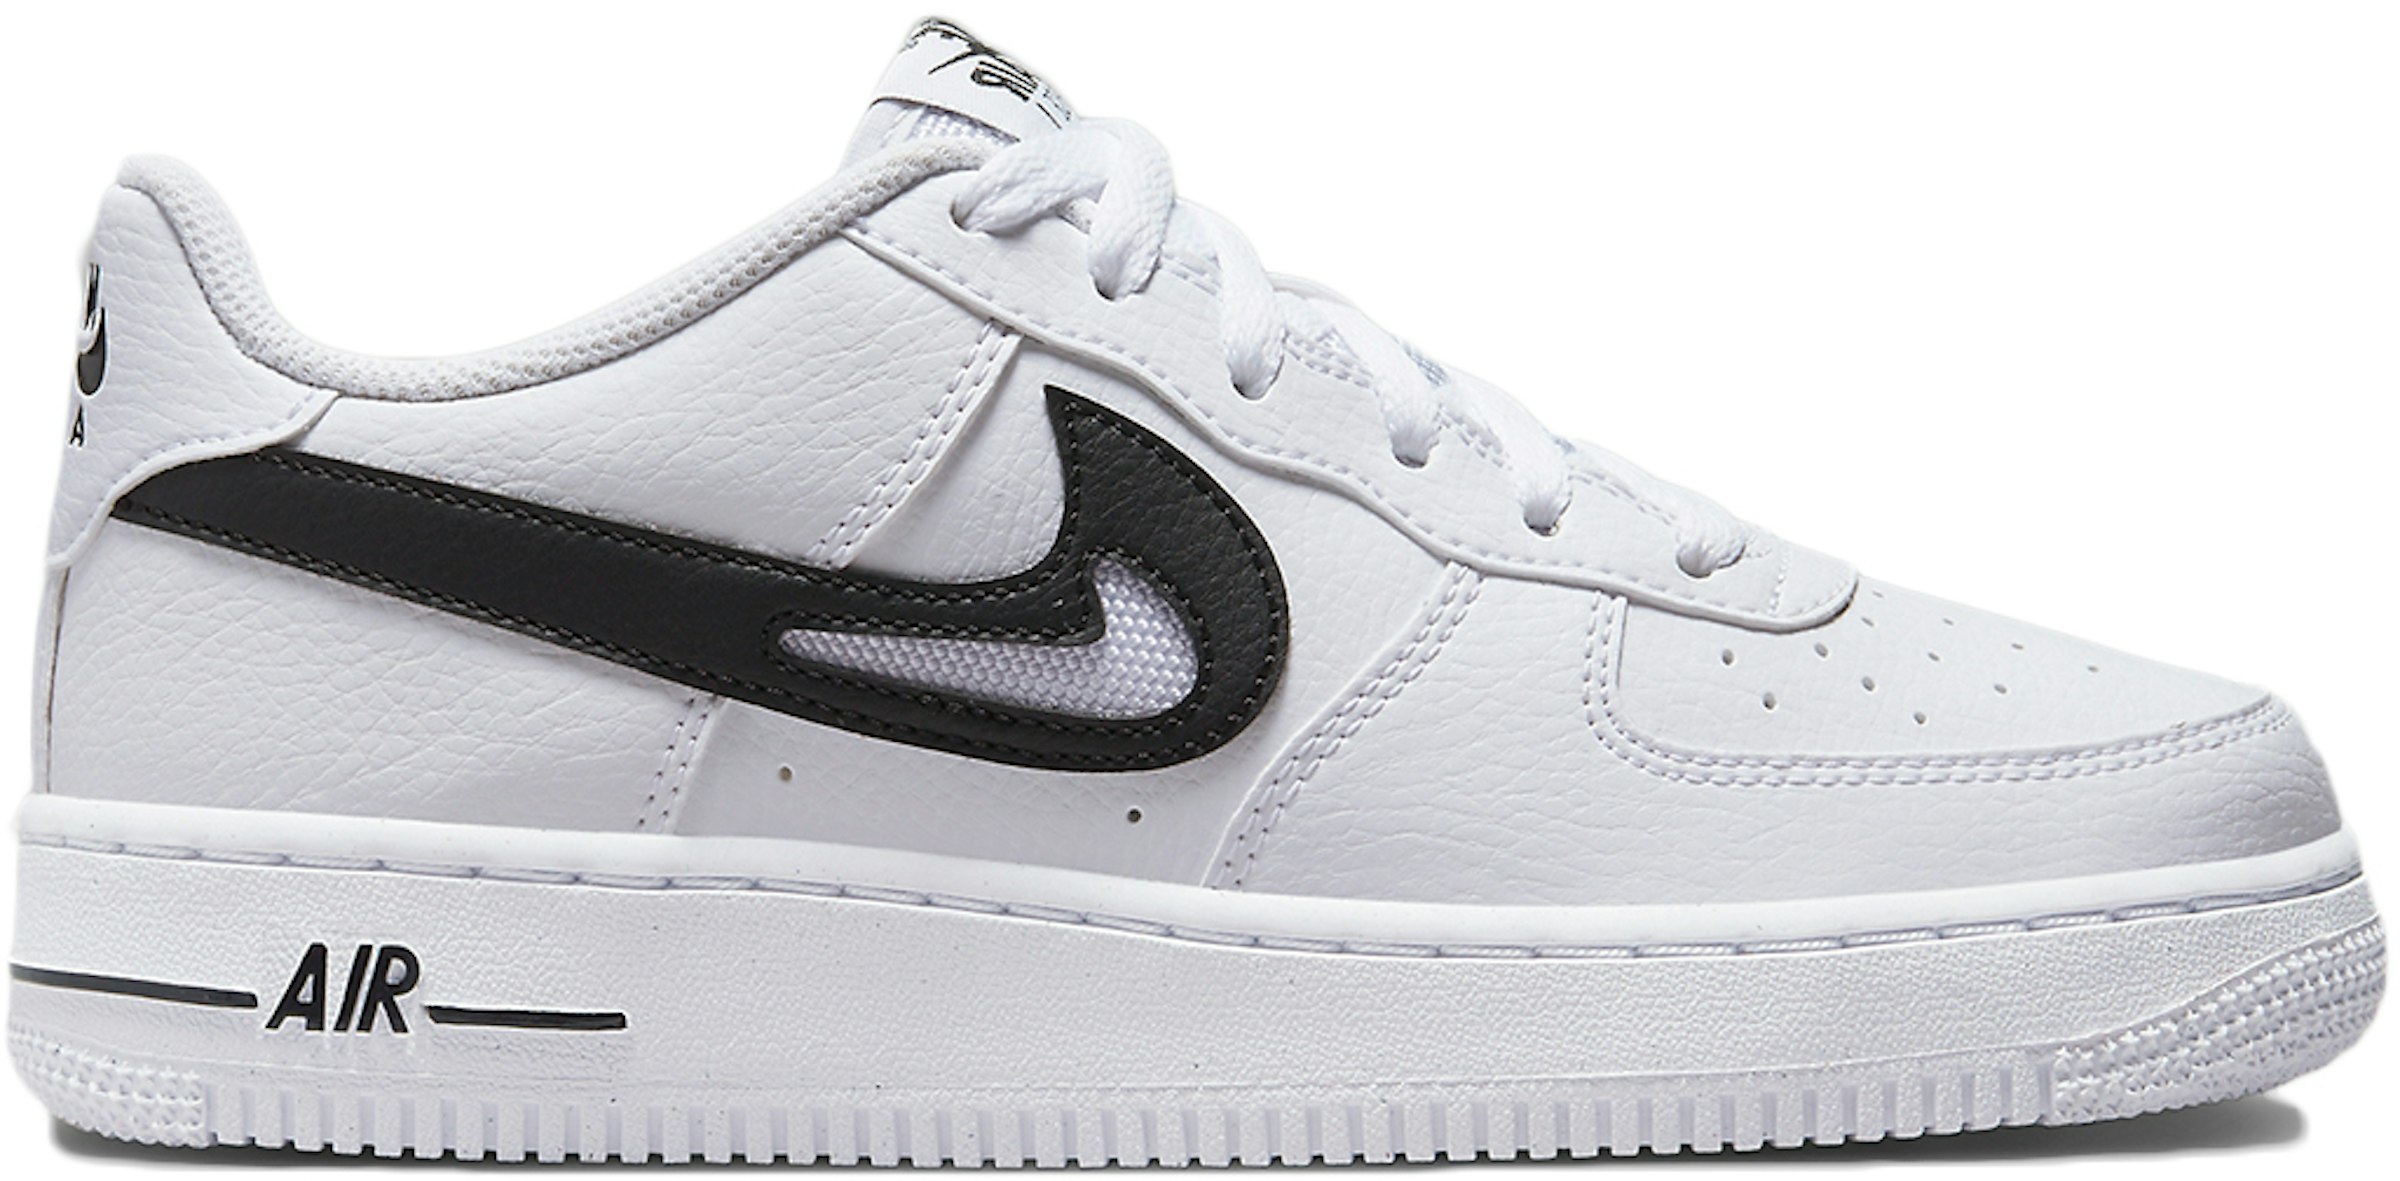 lenen weefgetouw Agrarisch Nike Air Force 1 Low Cut Out Swoosh White Black (GS) Kids' - DR7889-100 - US